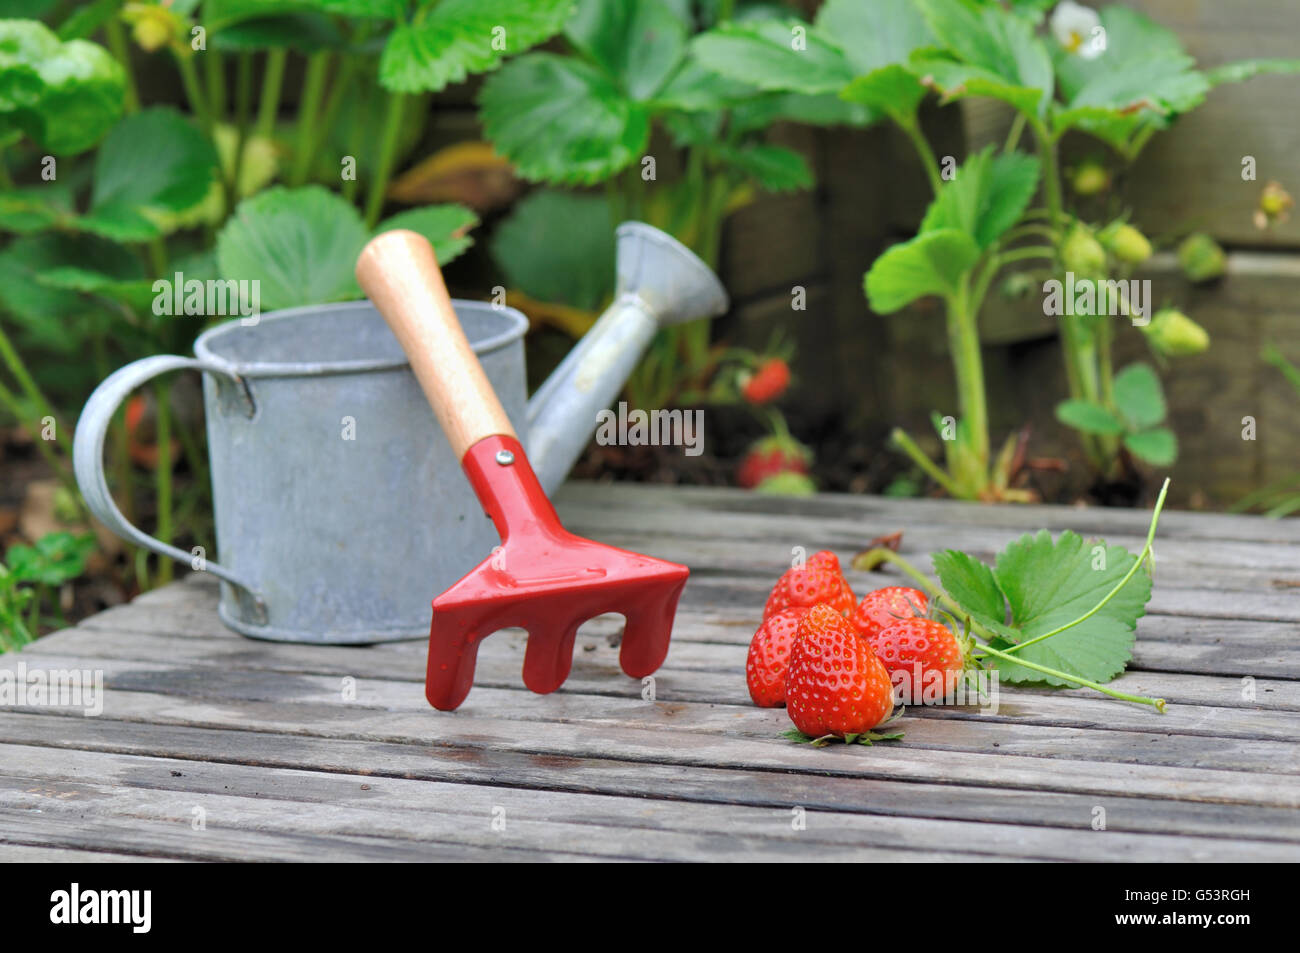 strawberries from garden on a plank with a small watering can and rake Stock Photo